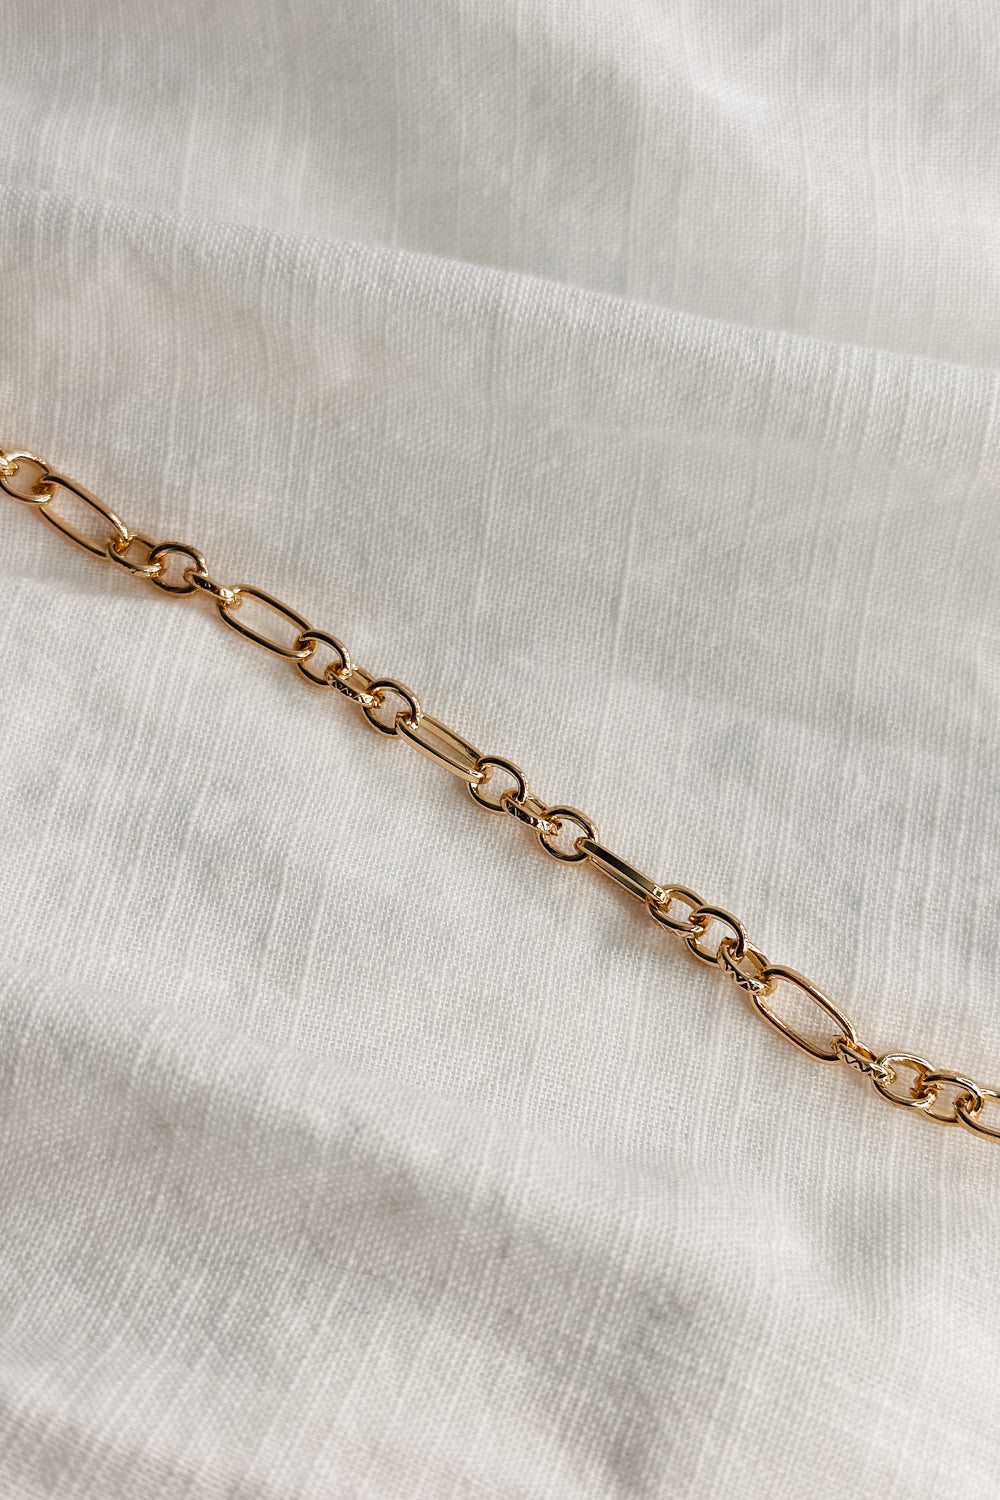 Image shows the Reagan Gold Chain Link Bracelet against a white background. Bracelet has gold circle and oval links. 